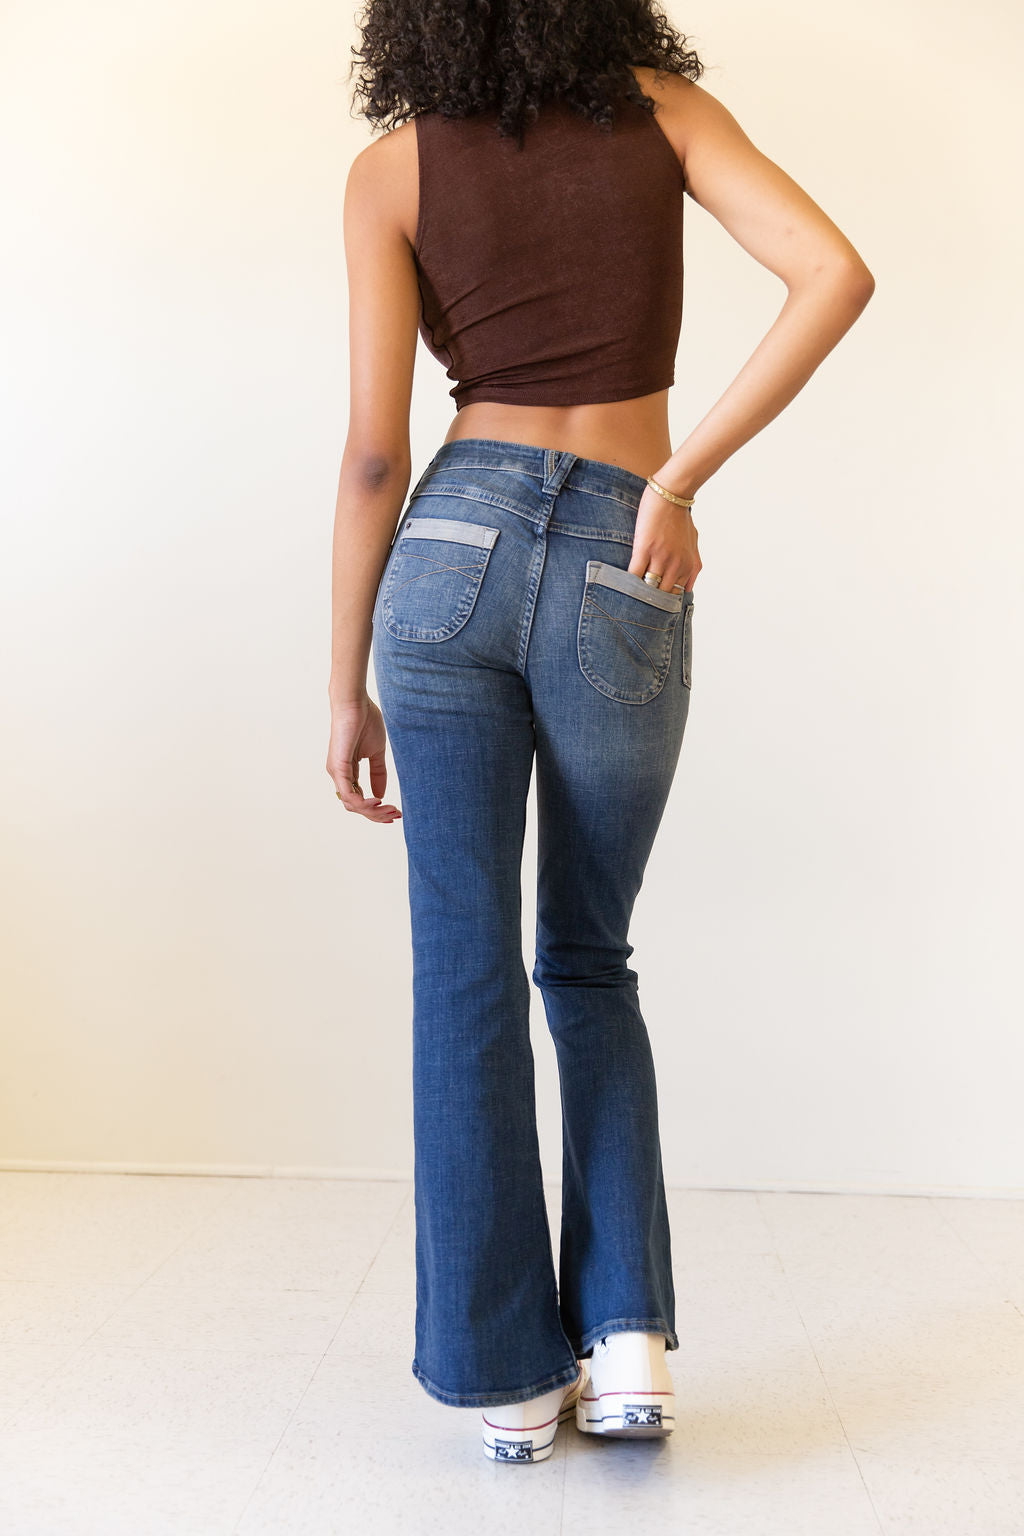 BDG Low-Rise Vintage-Style Flare Jeans